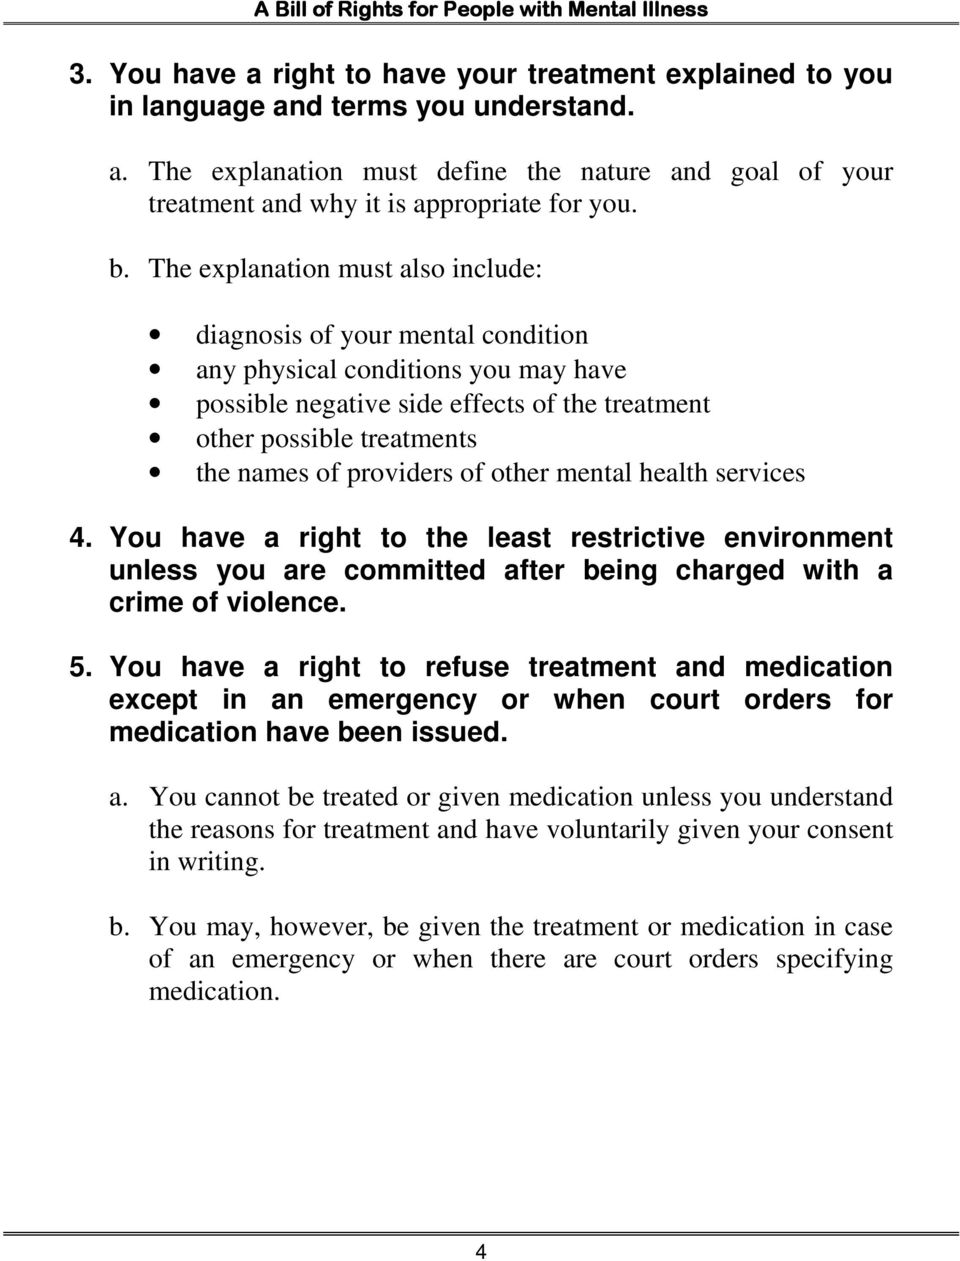 providers of other mental health services 4. You have a right to the least restrictive environment unless you are committed after being charged with a crime of violence. 5.